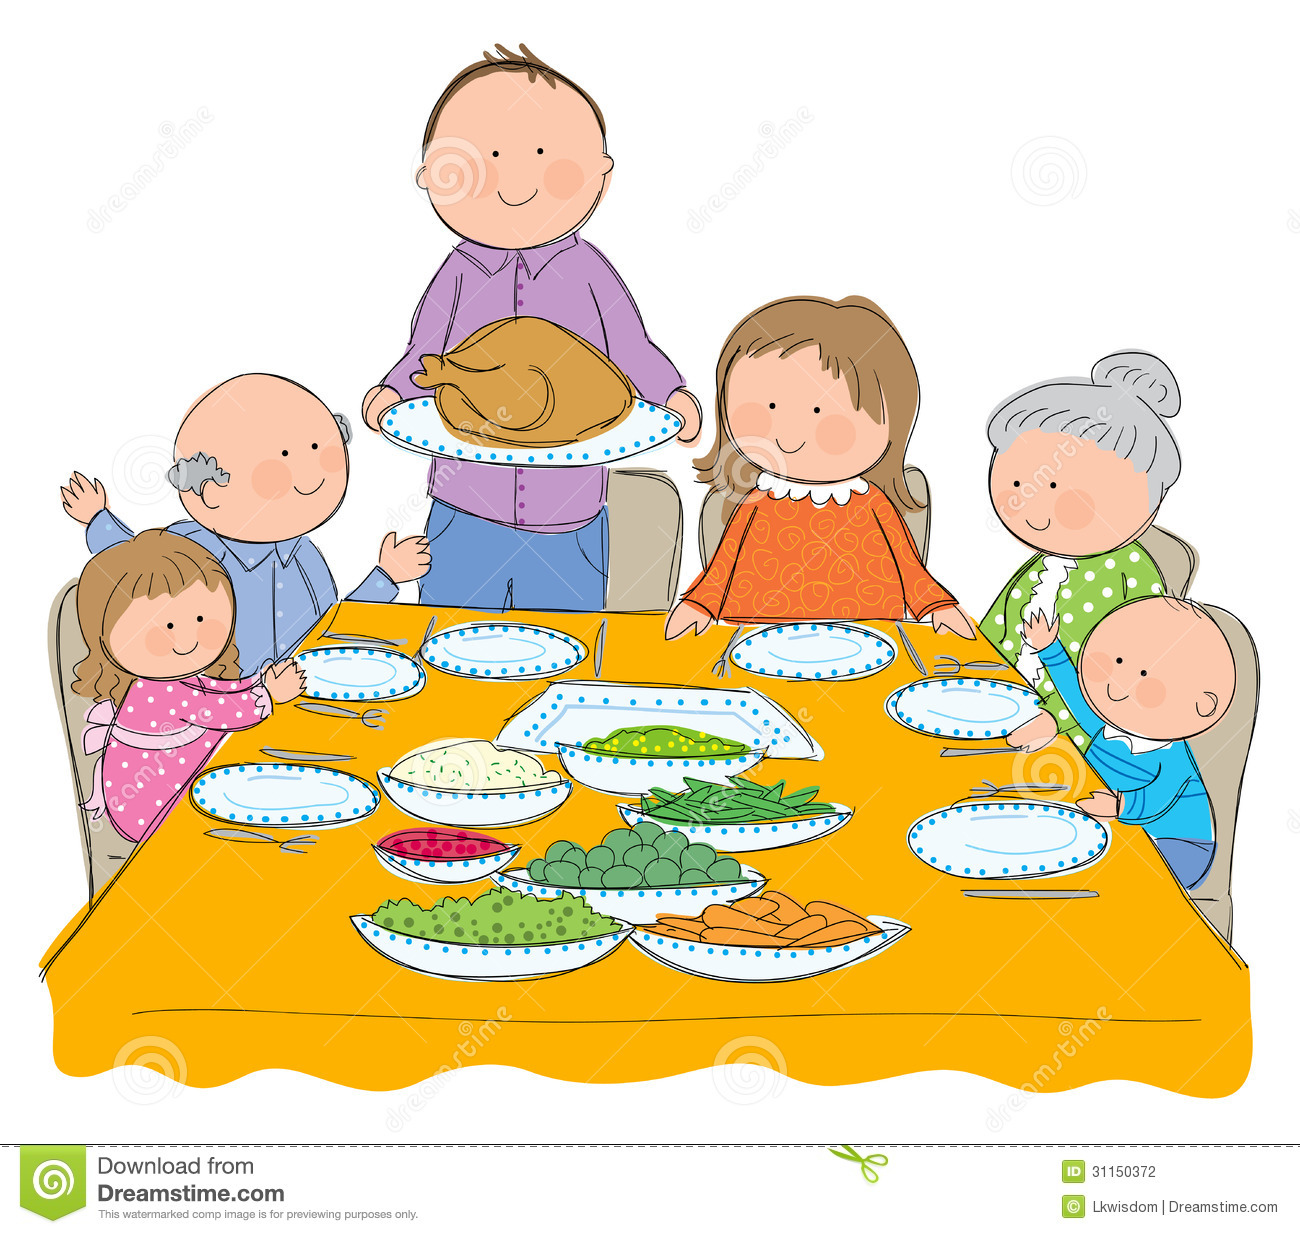 Hand Drawn Picture Of Thanksgiving Dinner  Illustrated In A Loose